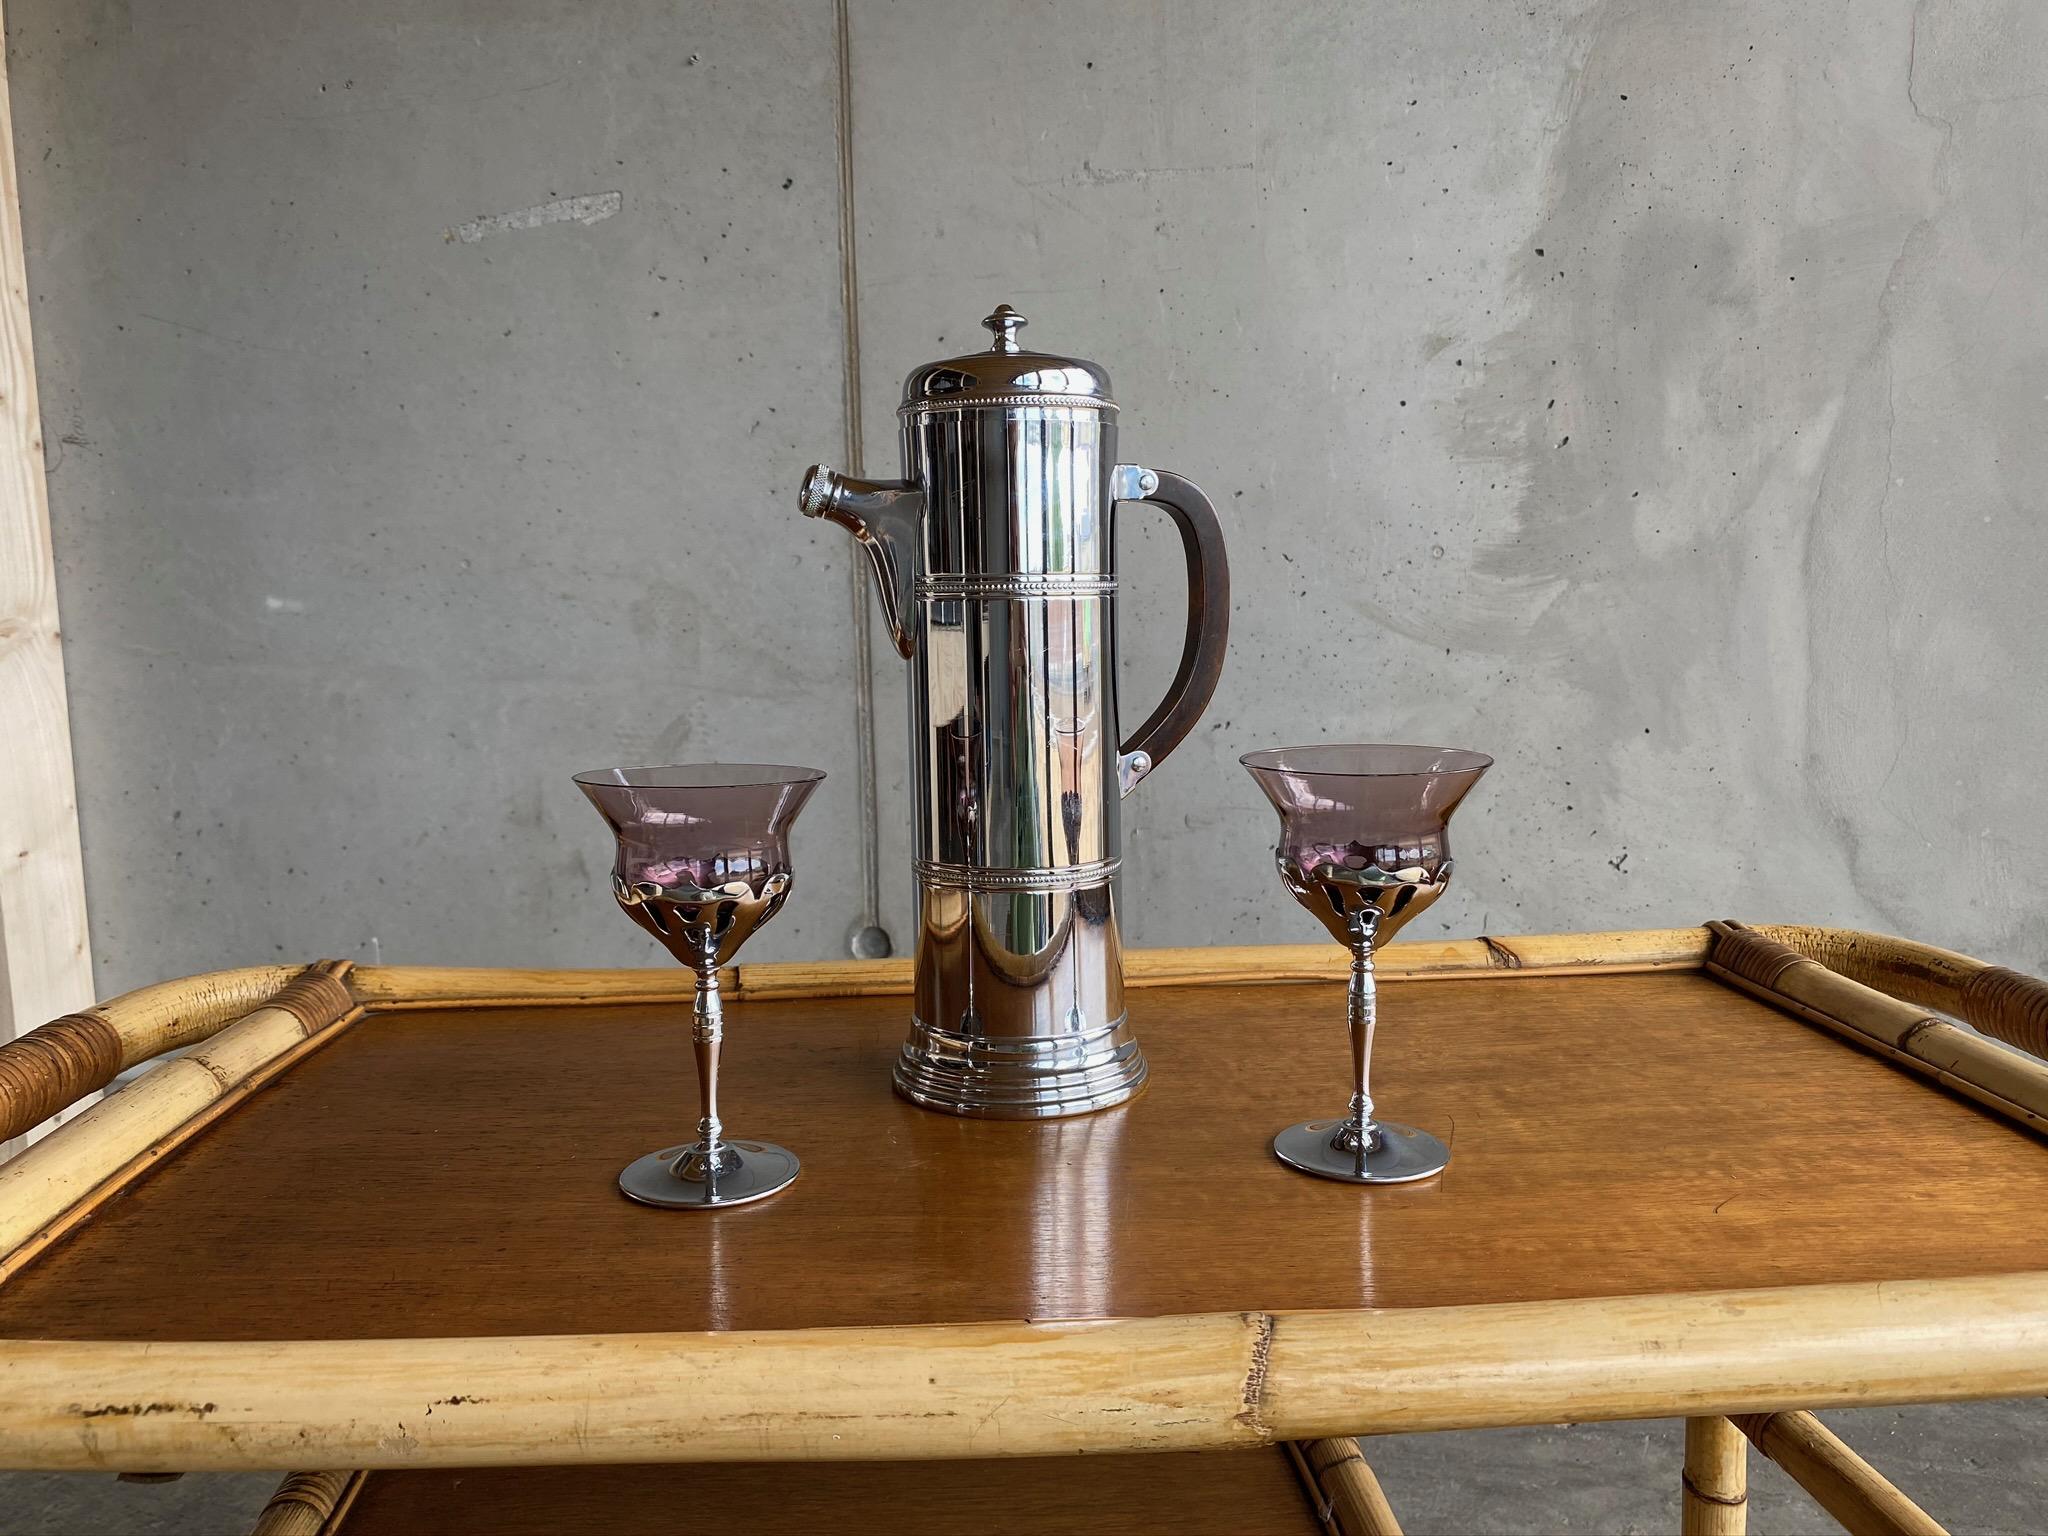 Rare Art Deco Bauhaus shaker from the 1930s in the so-called coffee pot style. 
The name coffee pot style is self-explanatory in and of itself. The shaker has the shape of a coffee pot, so back in time you could secretly take an alcoholic drink in